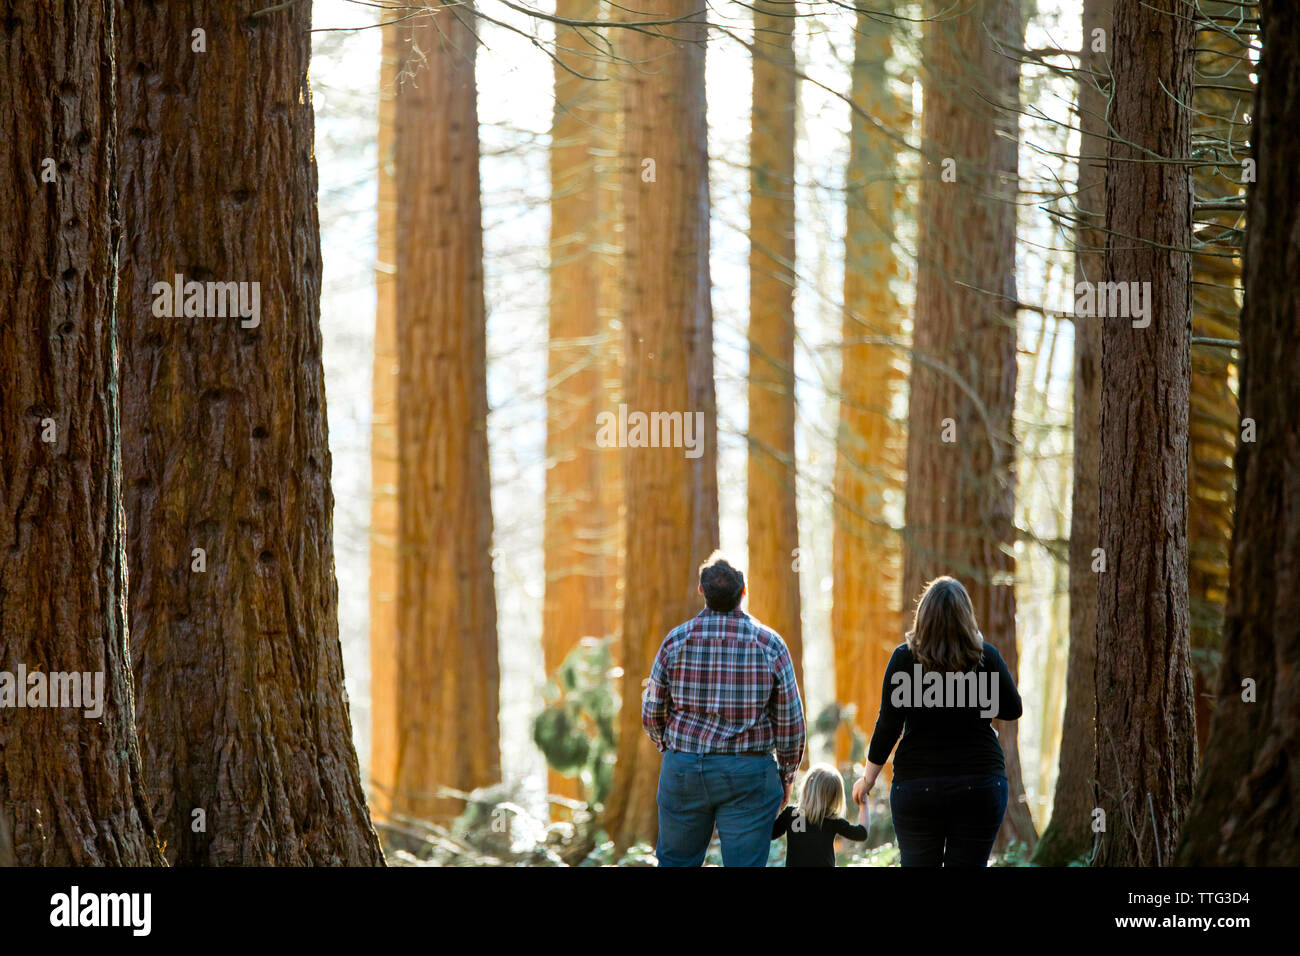 family of three looking up in awe of the forest Stock Photo